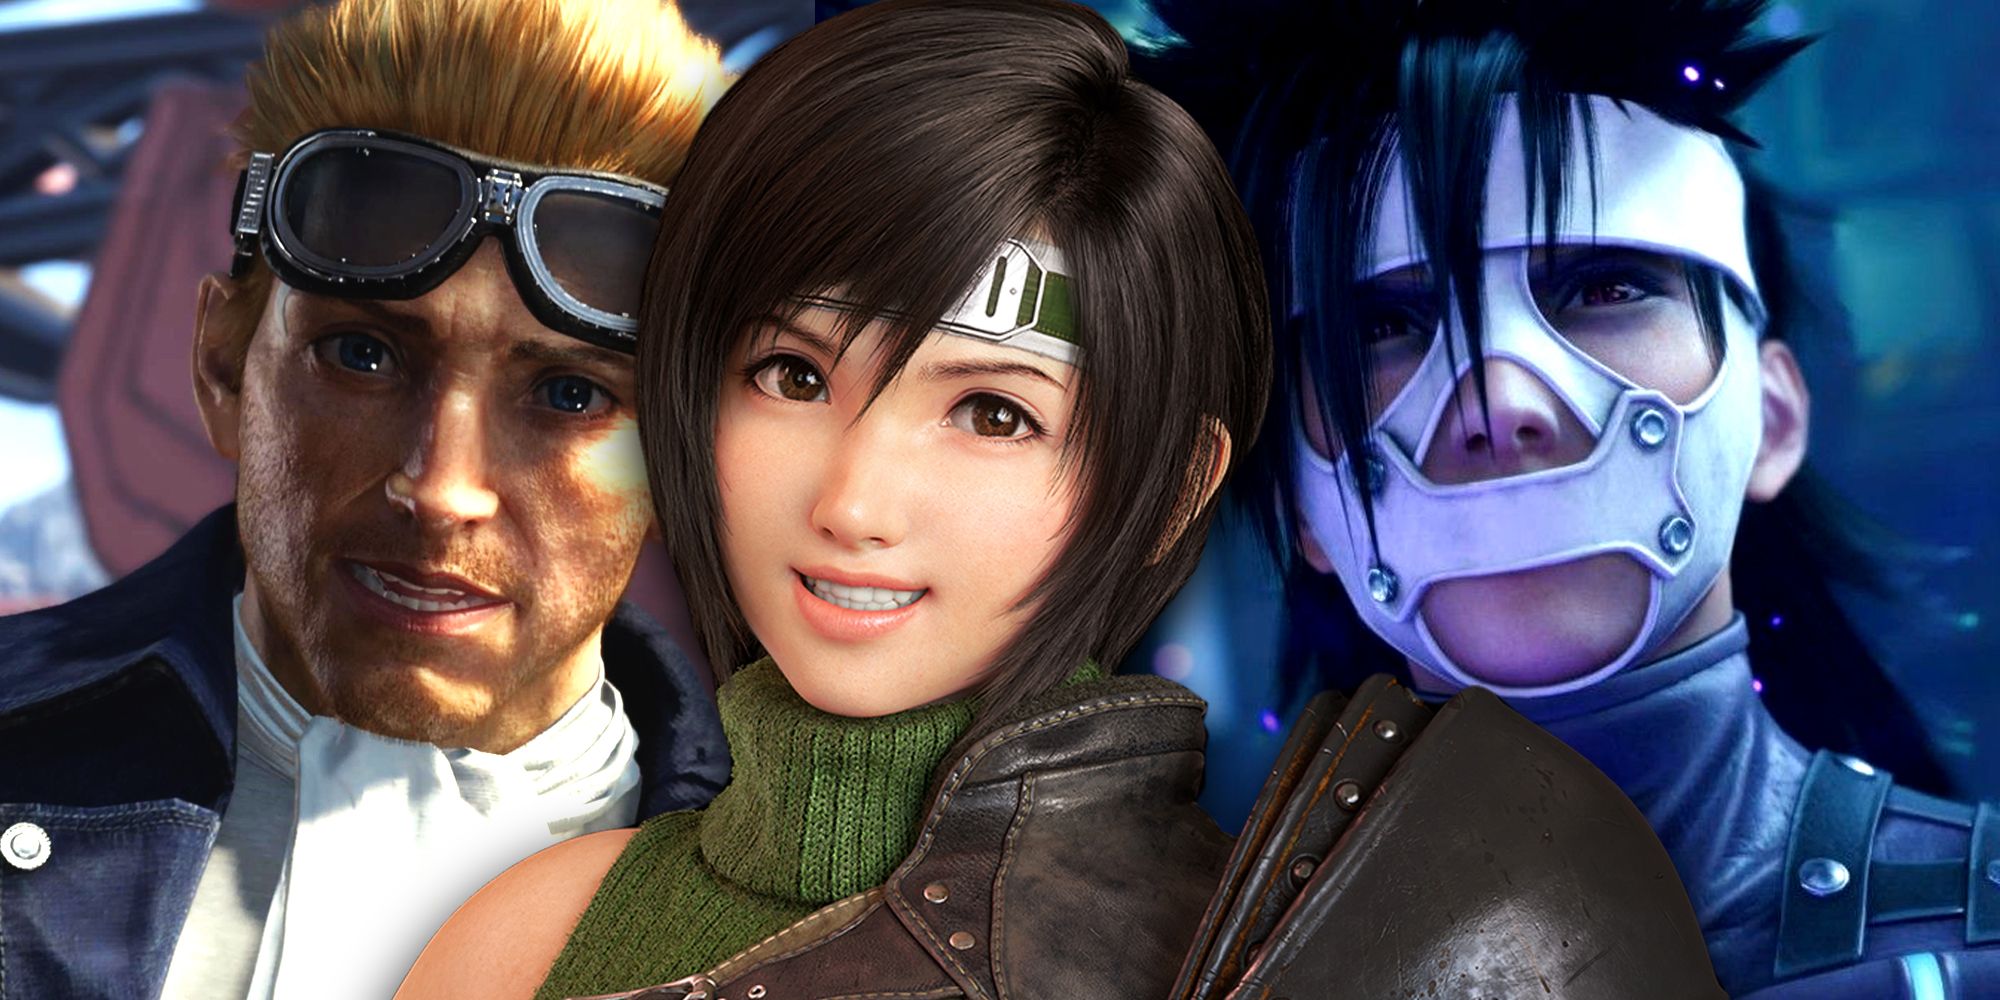 The ninja Yuffie in front of the pilot Cid Highwind and Deepground member Nero in FF7 Rebirth and Remake.